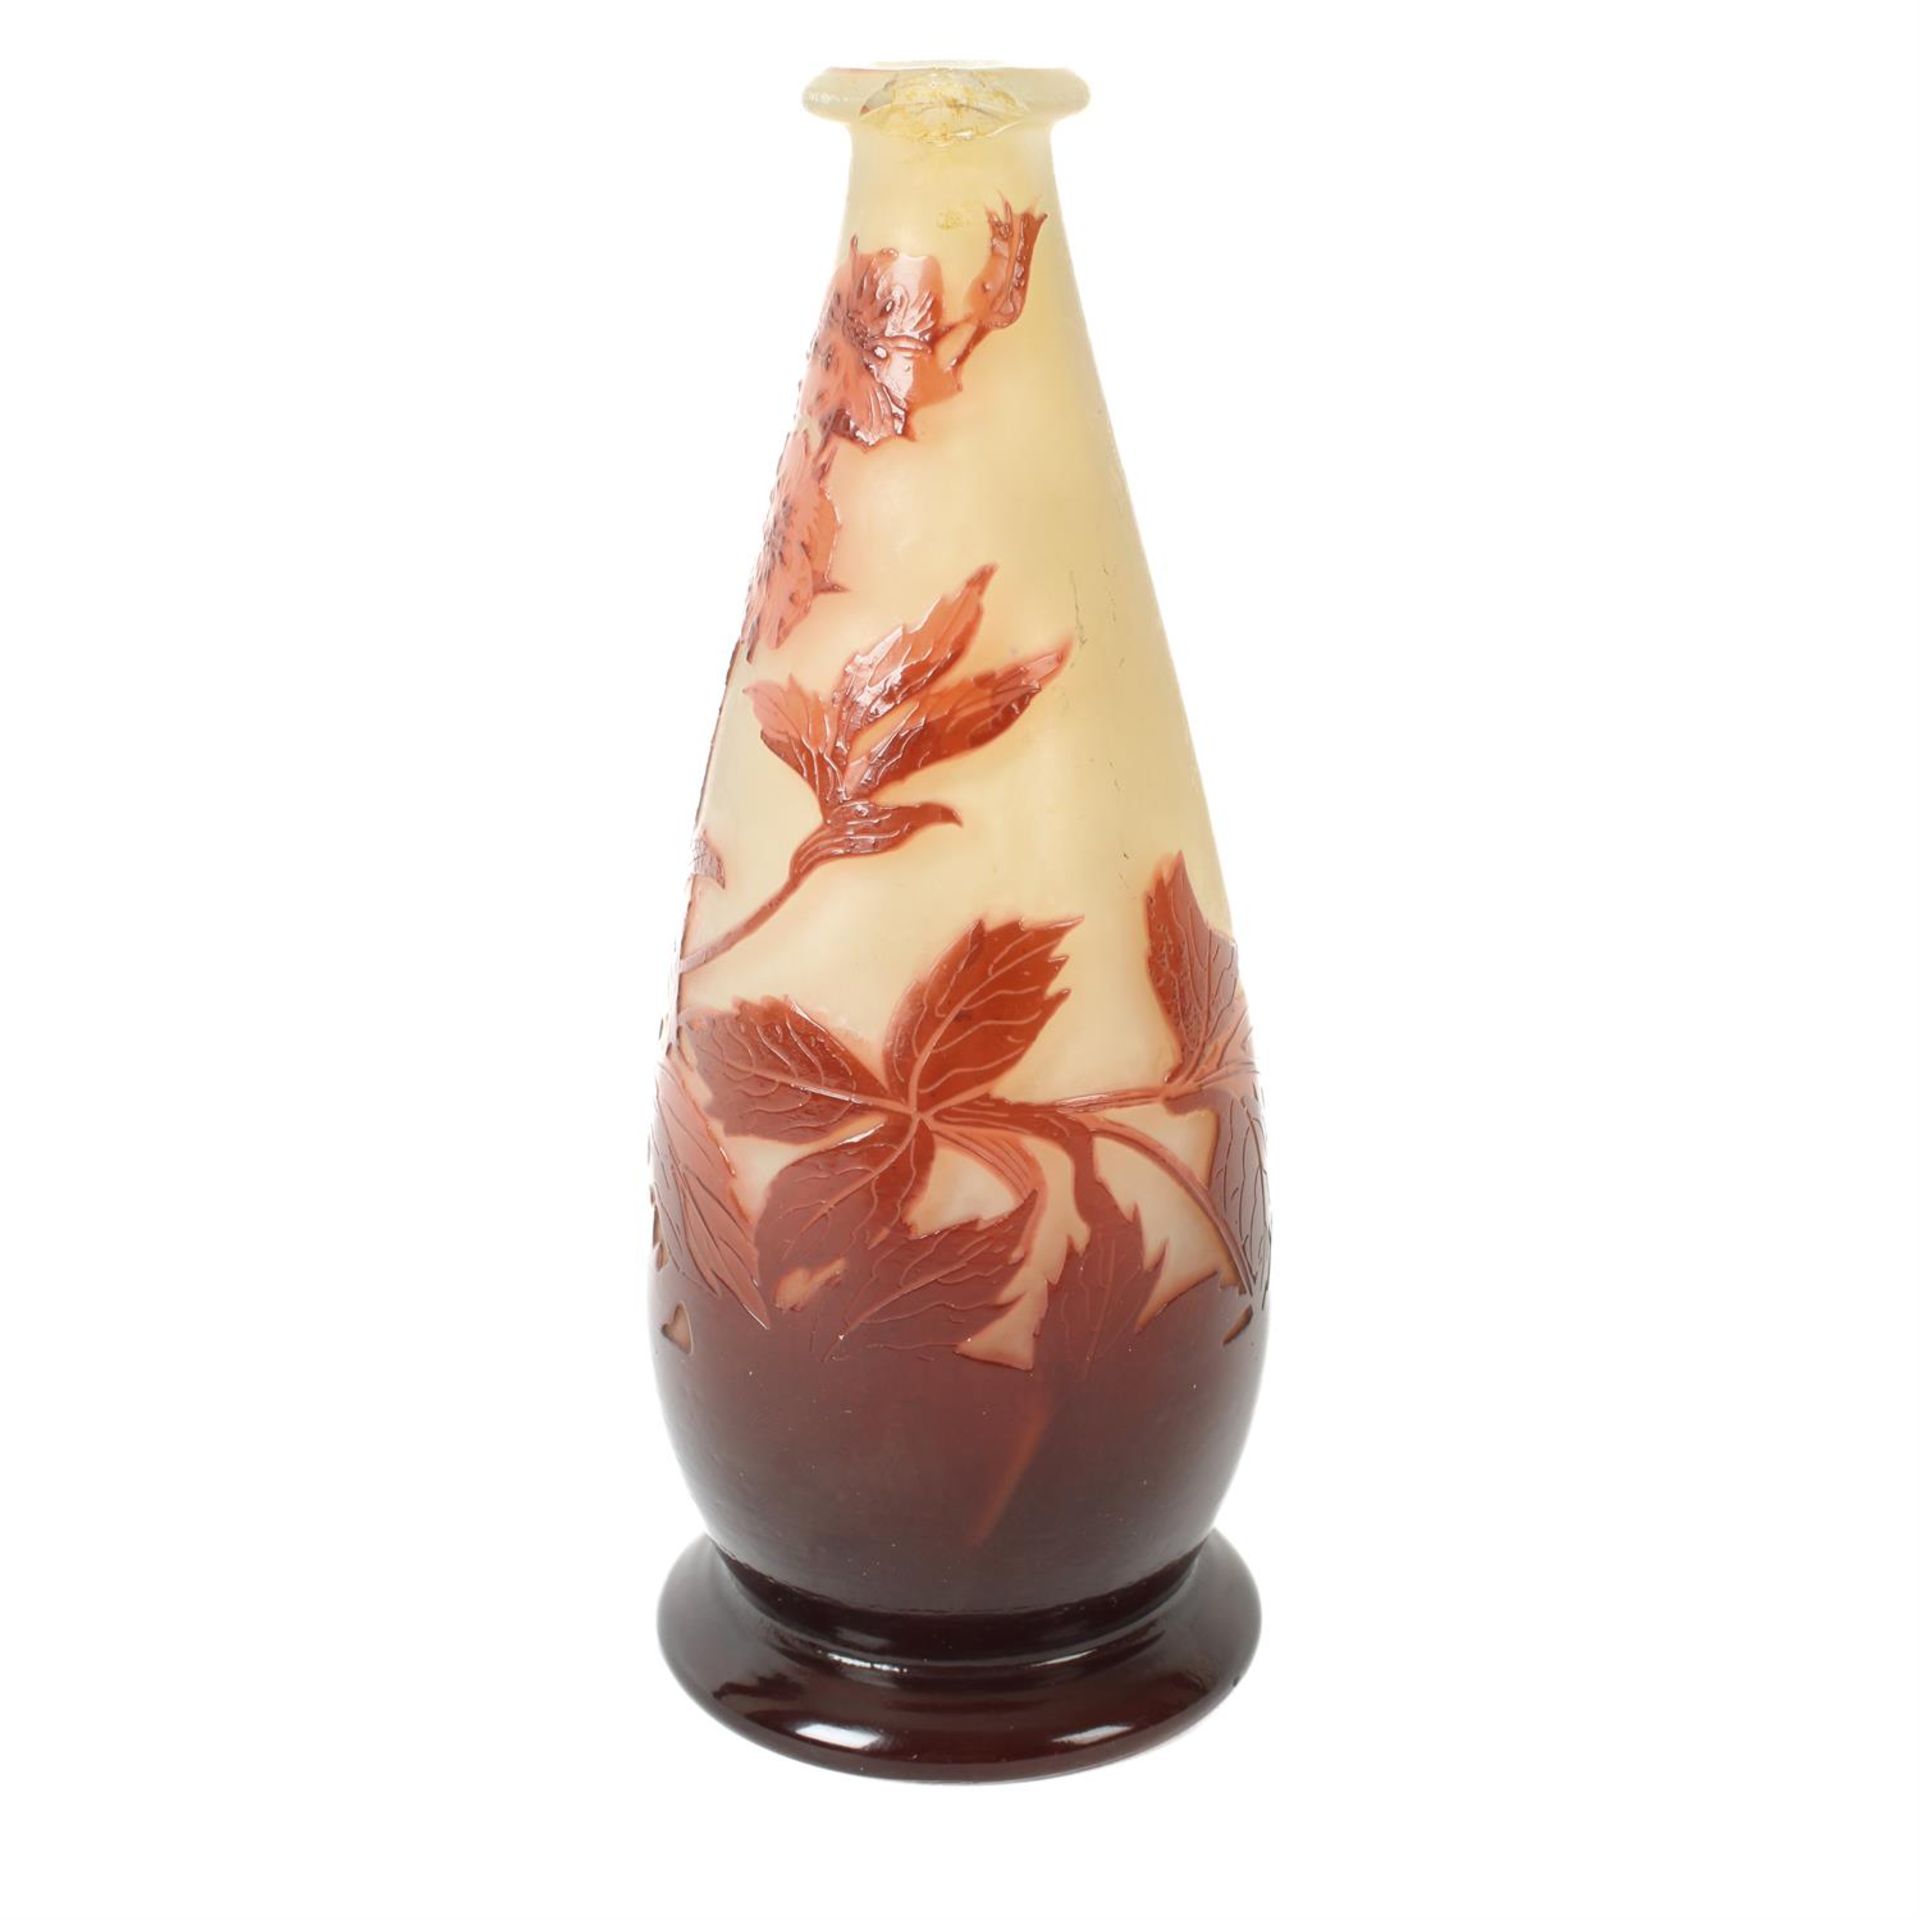 Emile Galle cameo glass vase with dog roses - Image 3 of 4